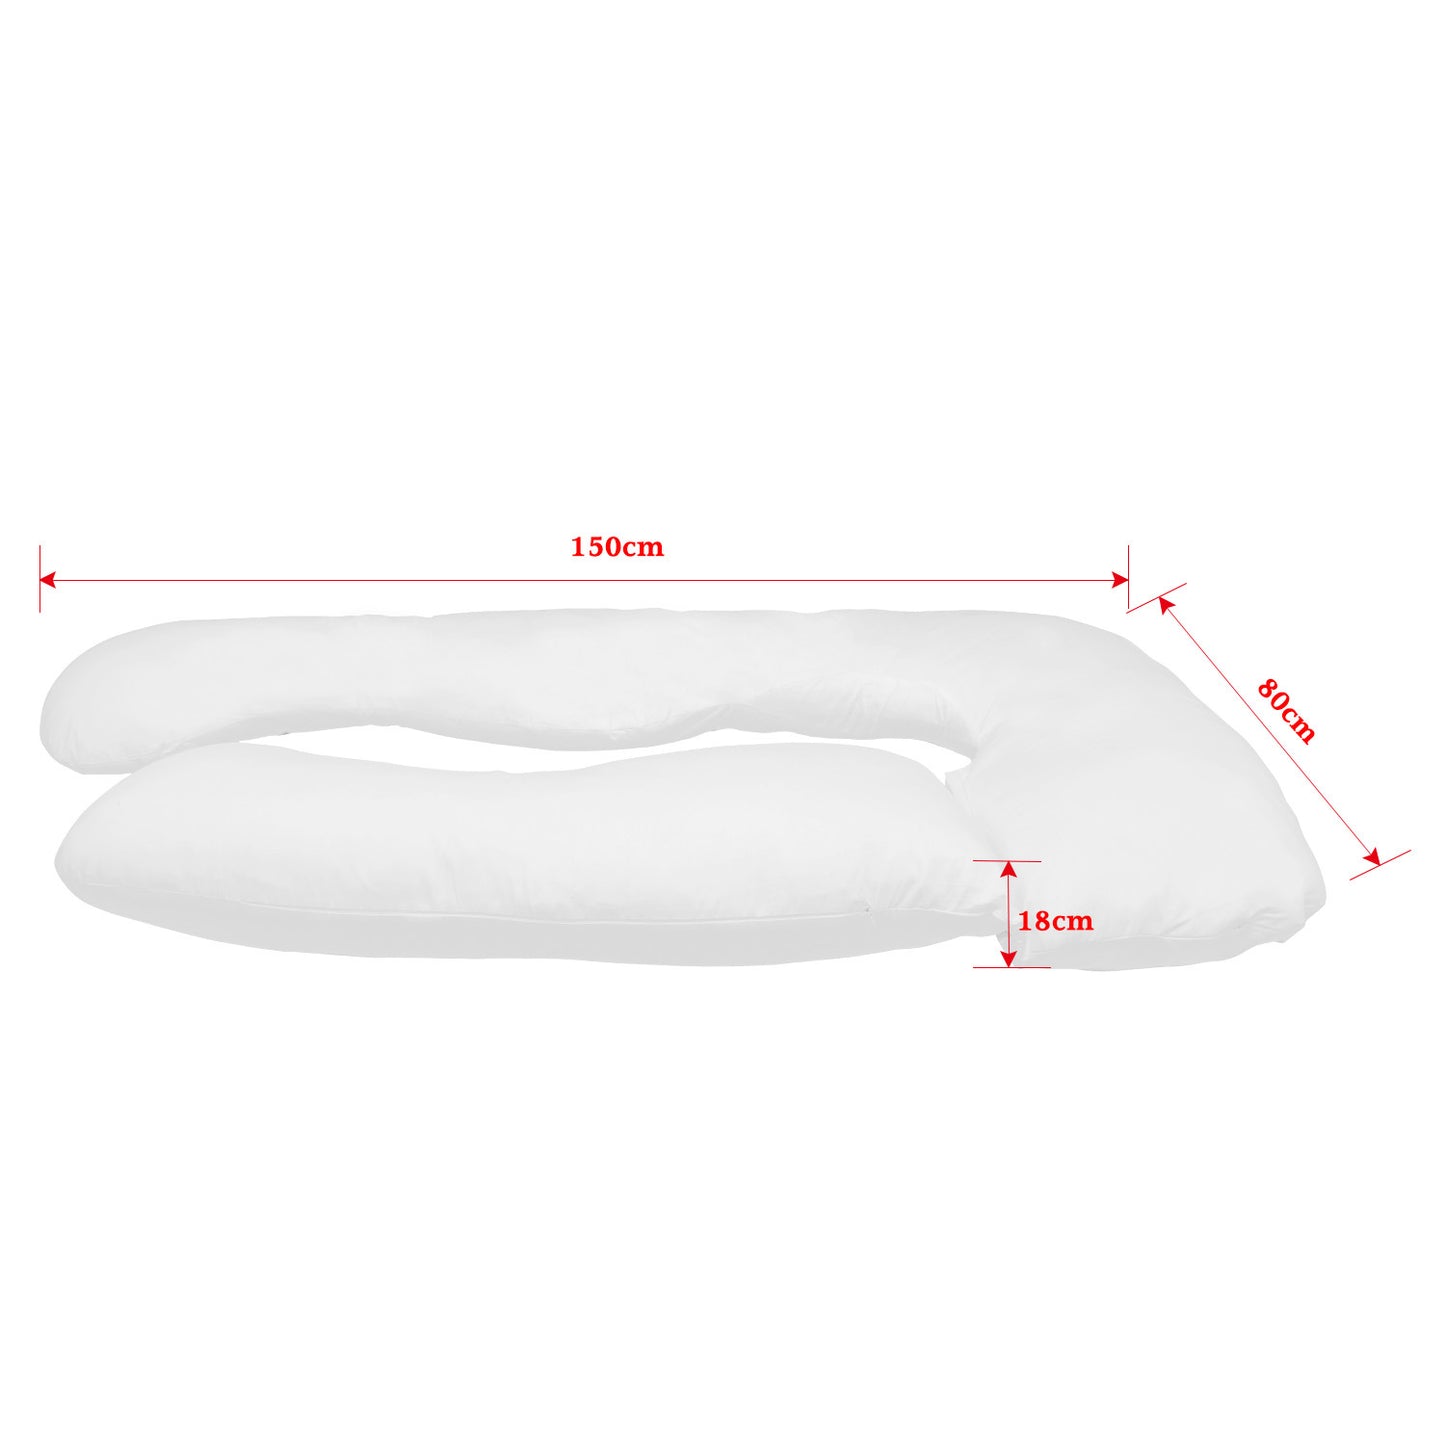 Pregnancy U Shaped Maternity Pillow Full Body Maternity Belly Comfort Pillow